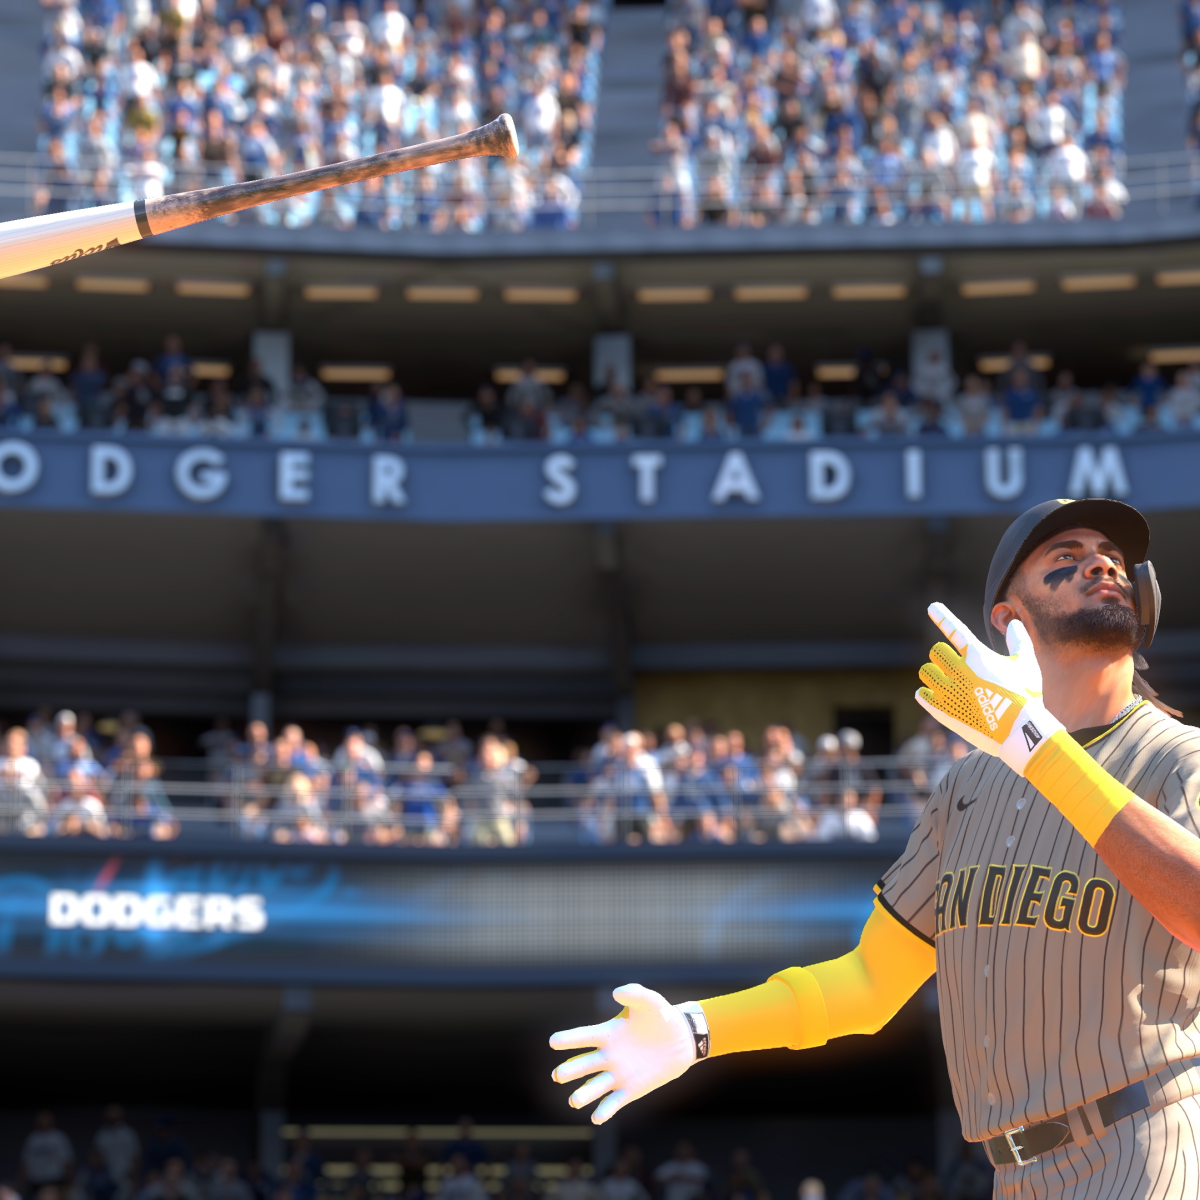 MLB The Show 21: the first multi-platform PlayStation Studios title tested